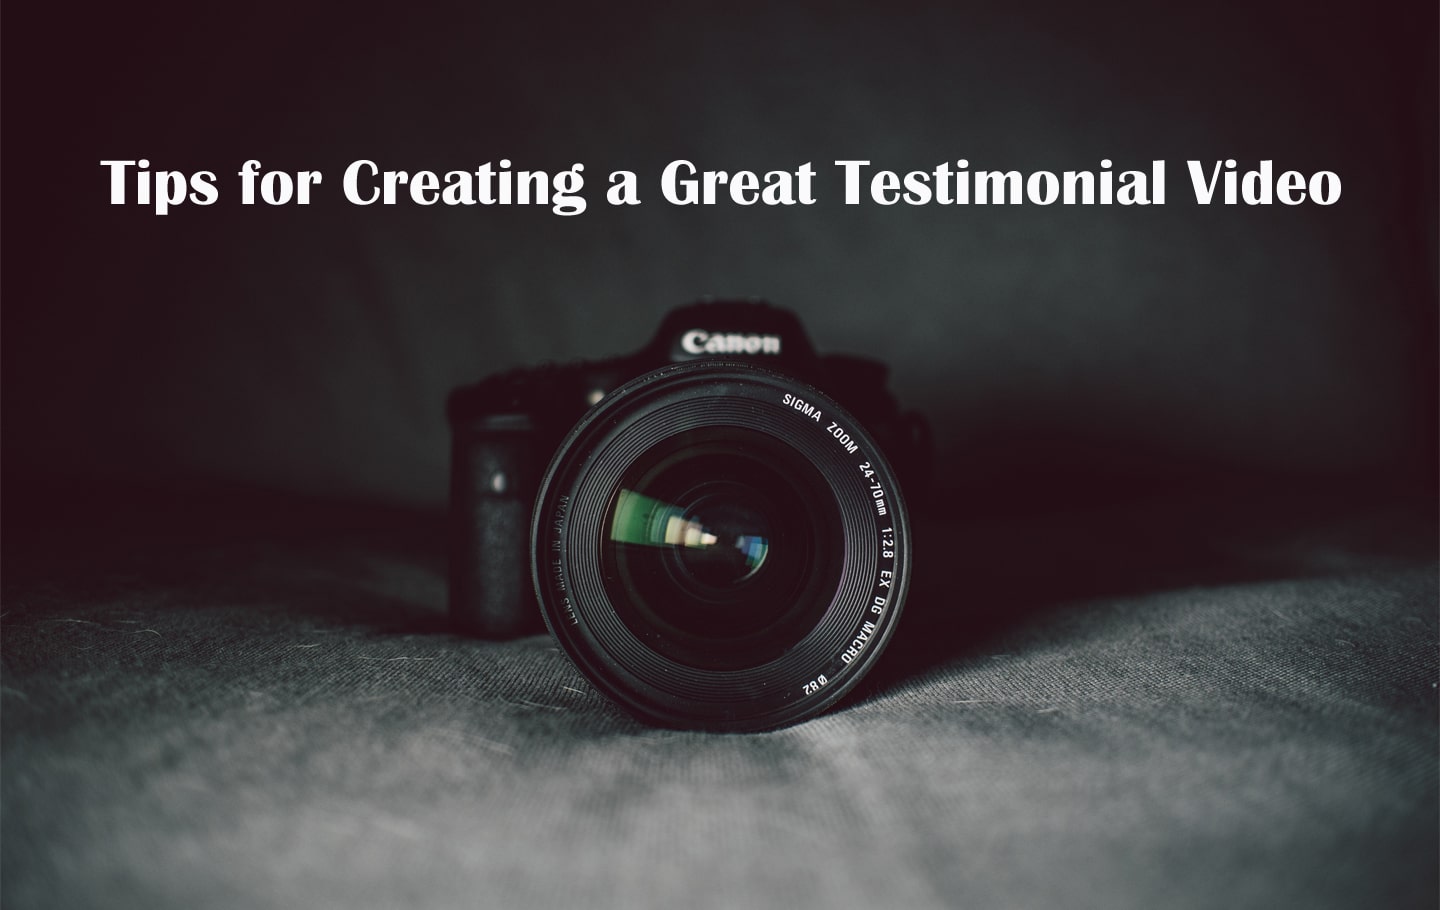 Creating a Great Testimonial Video